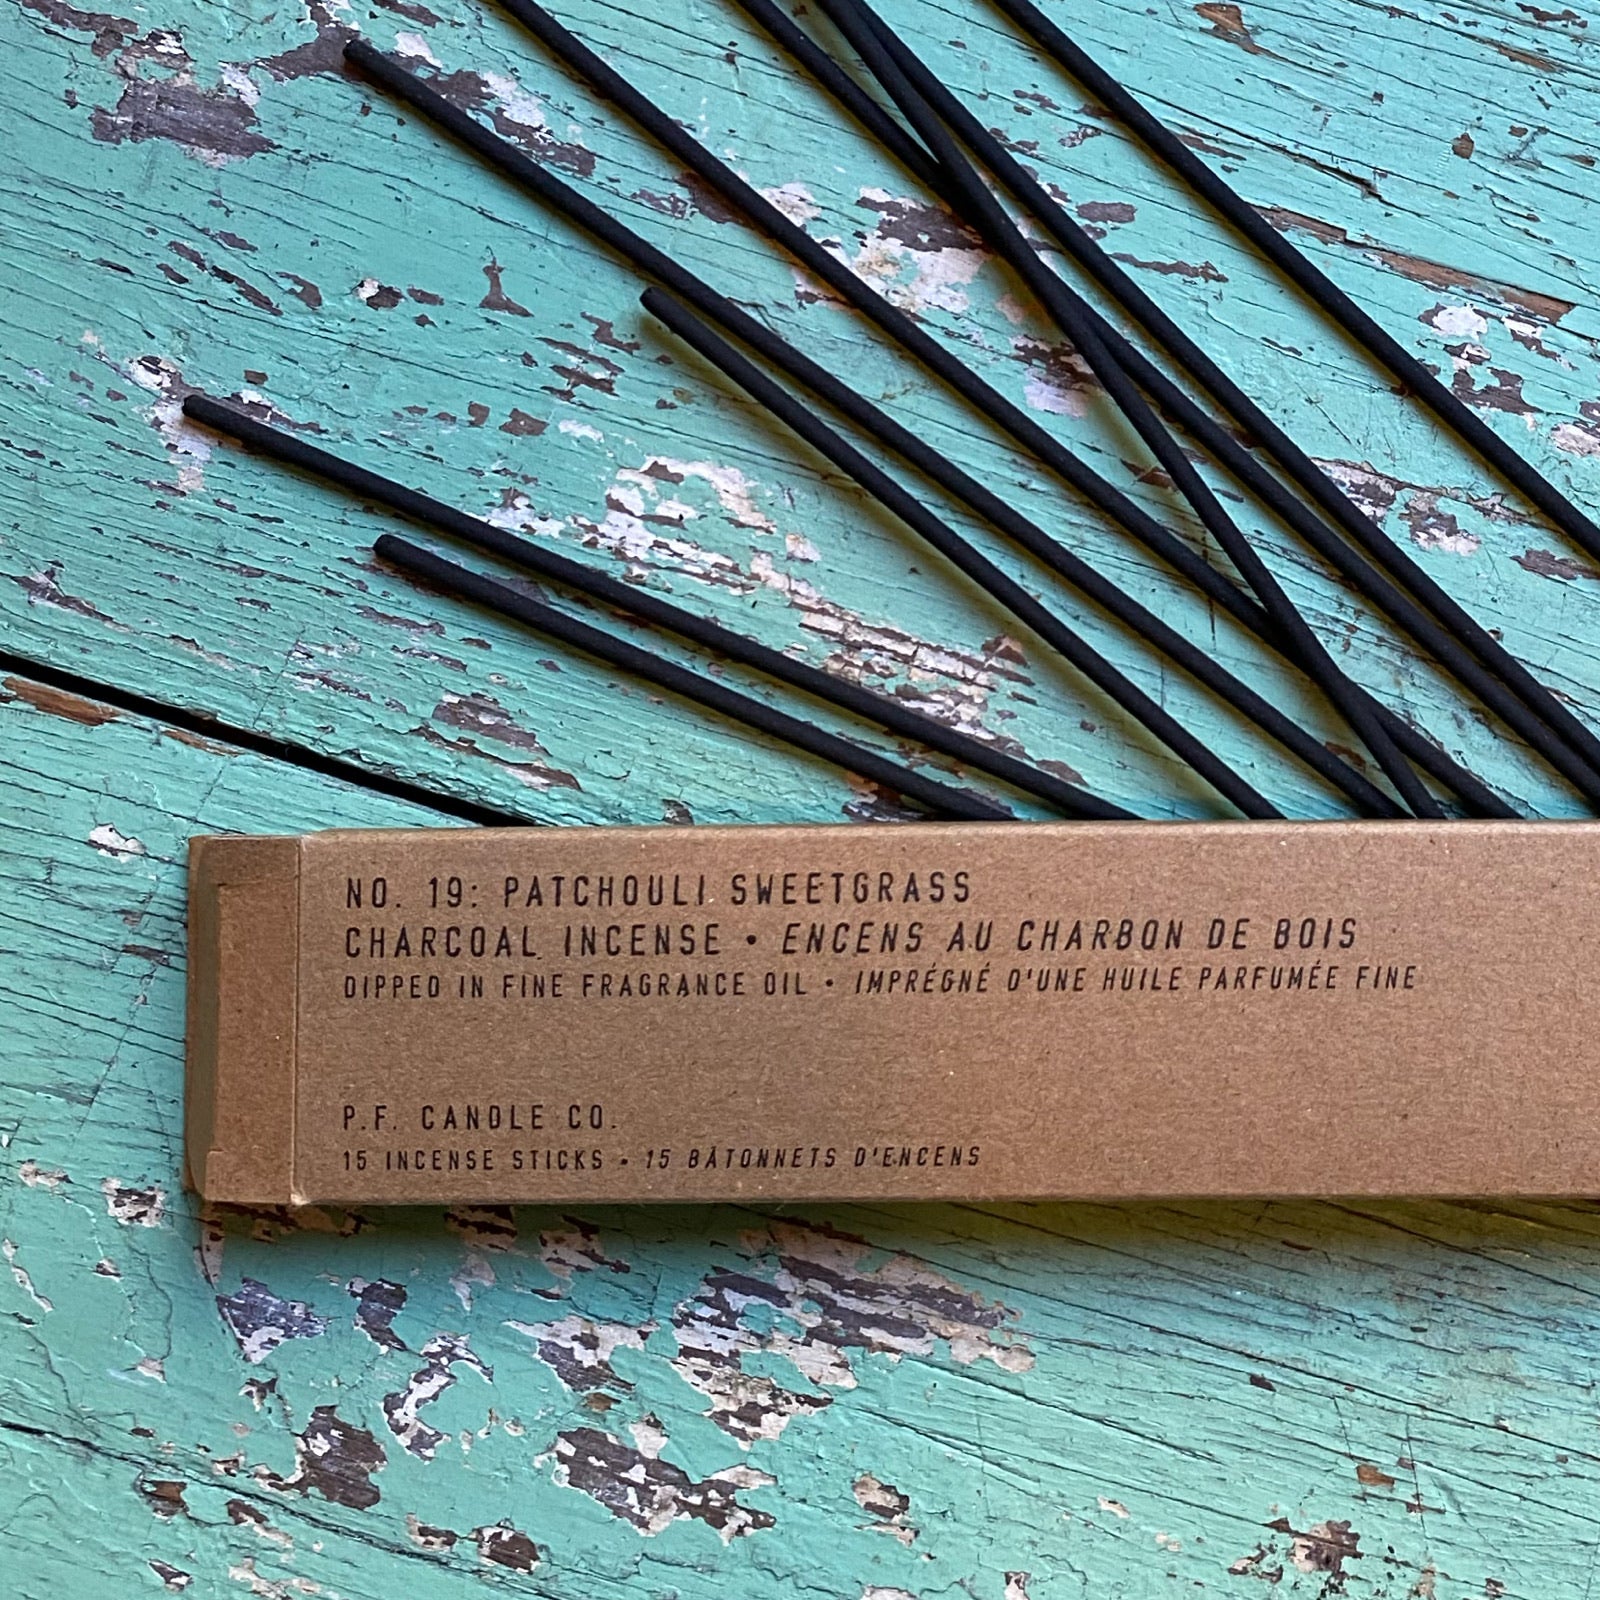 Patchouli & Sweetgrass Incense